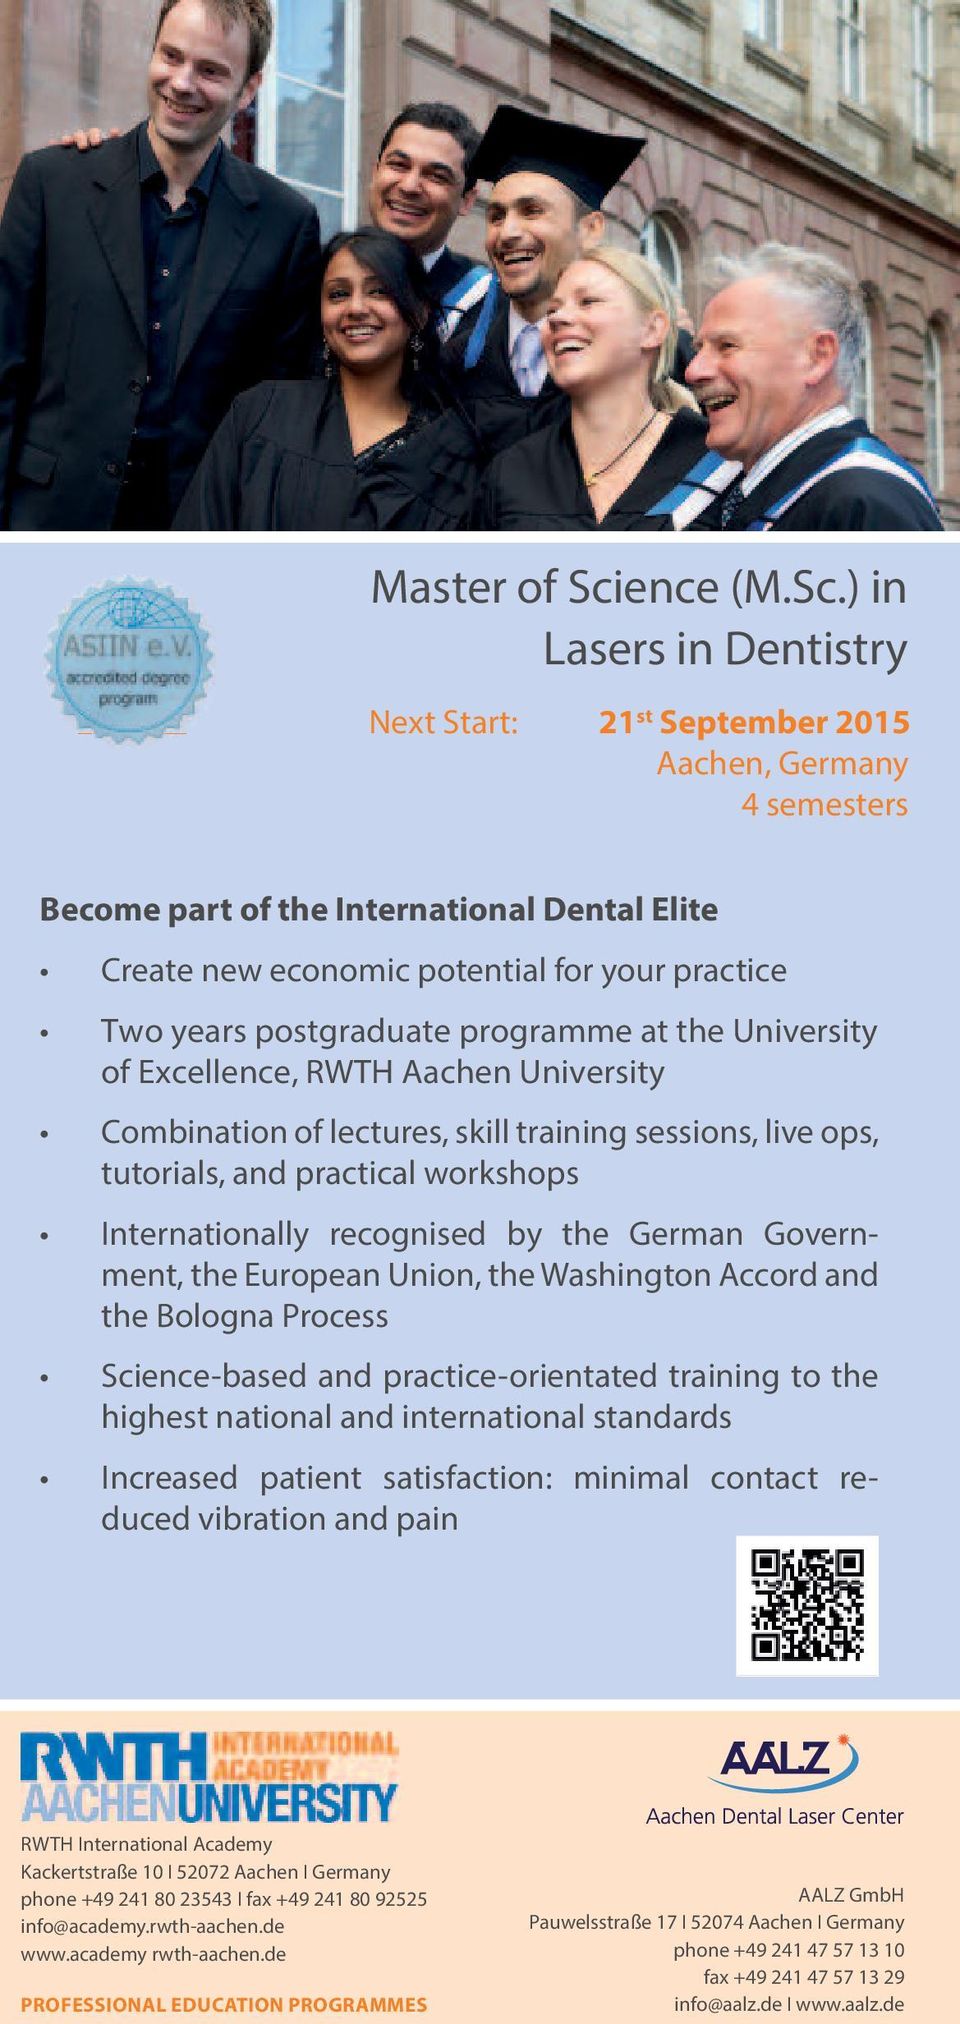 ) in Lasers in Dentistry Next Start: 21 st September 2015 Aachen, Germany 4 semesters Become part of the International Dental Elite Create new economic potential for your practice Two years